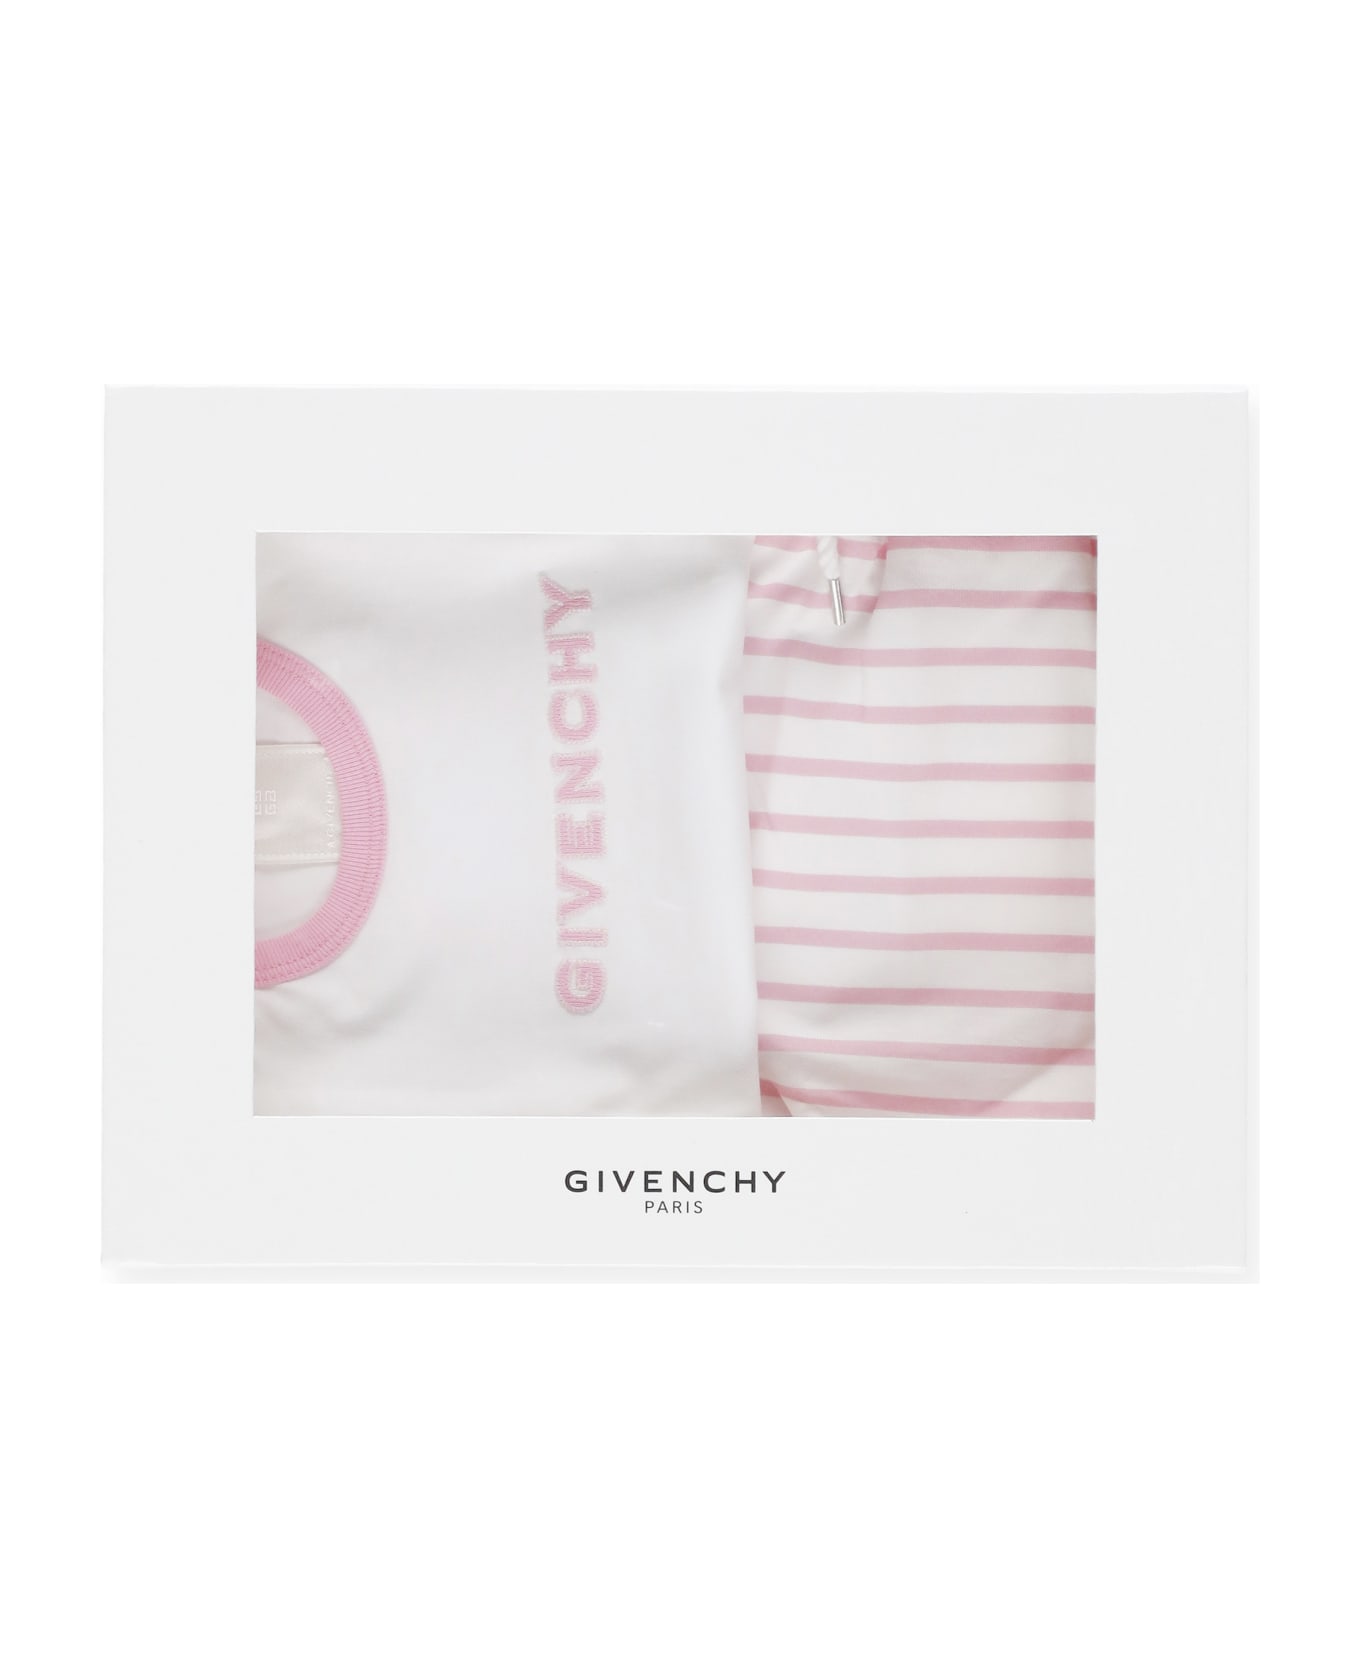 Givenchy Cotton Two-piece Set - Pink